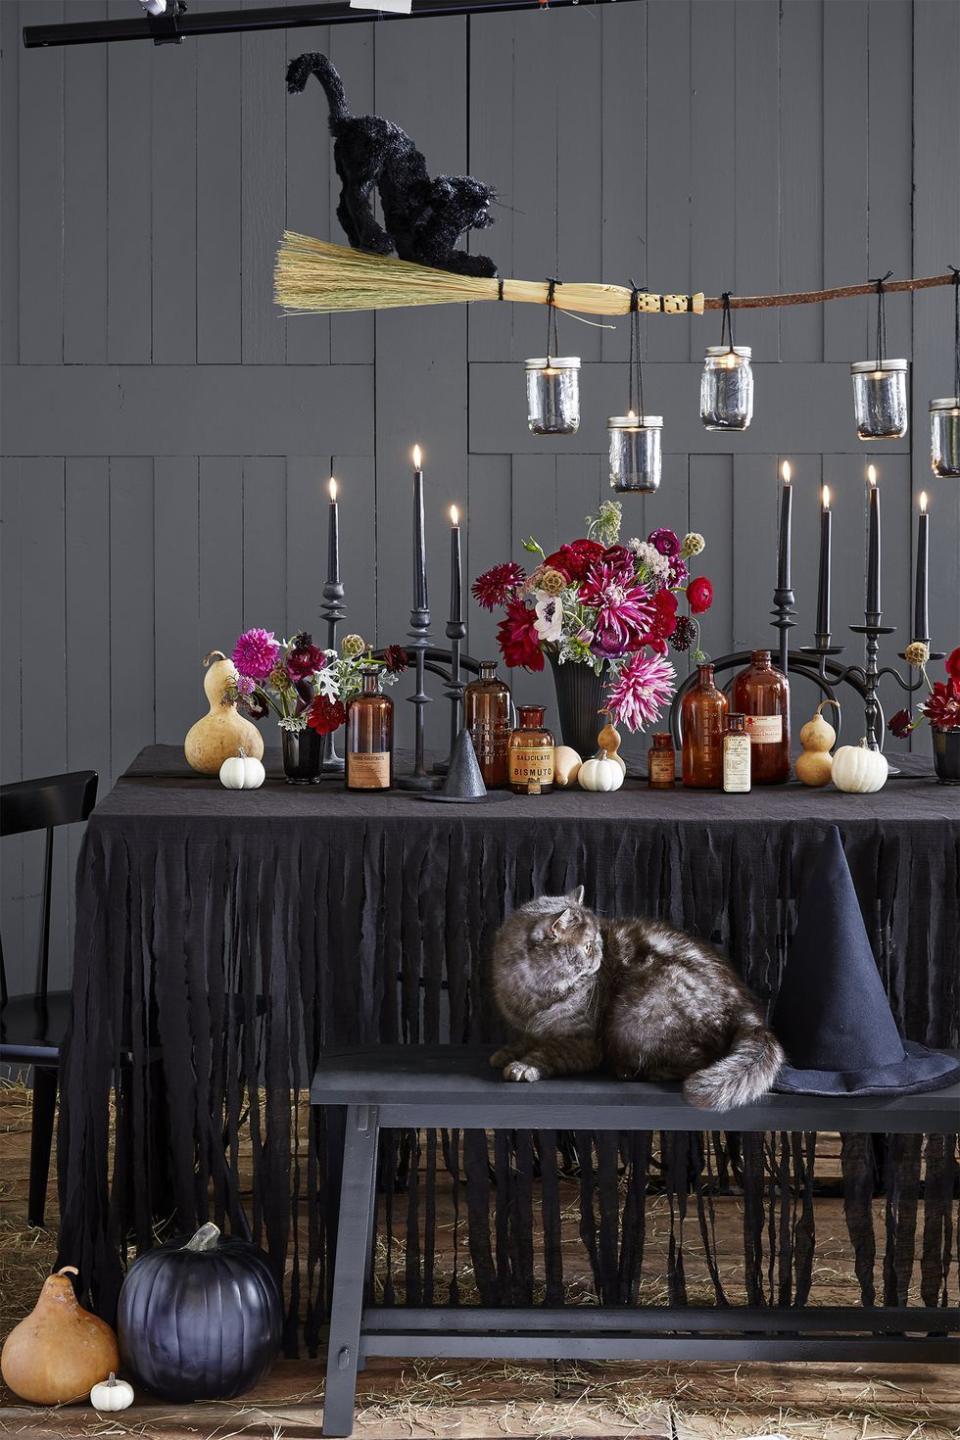 Haunt Your Home This Season with These Easy DIY Crafts